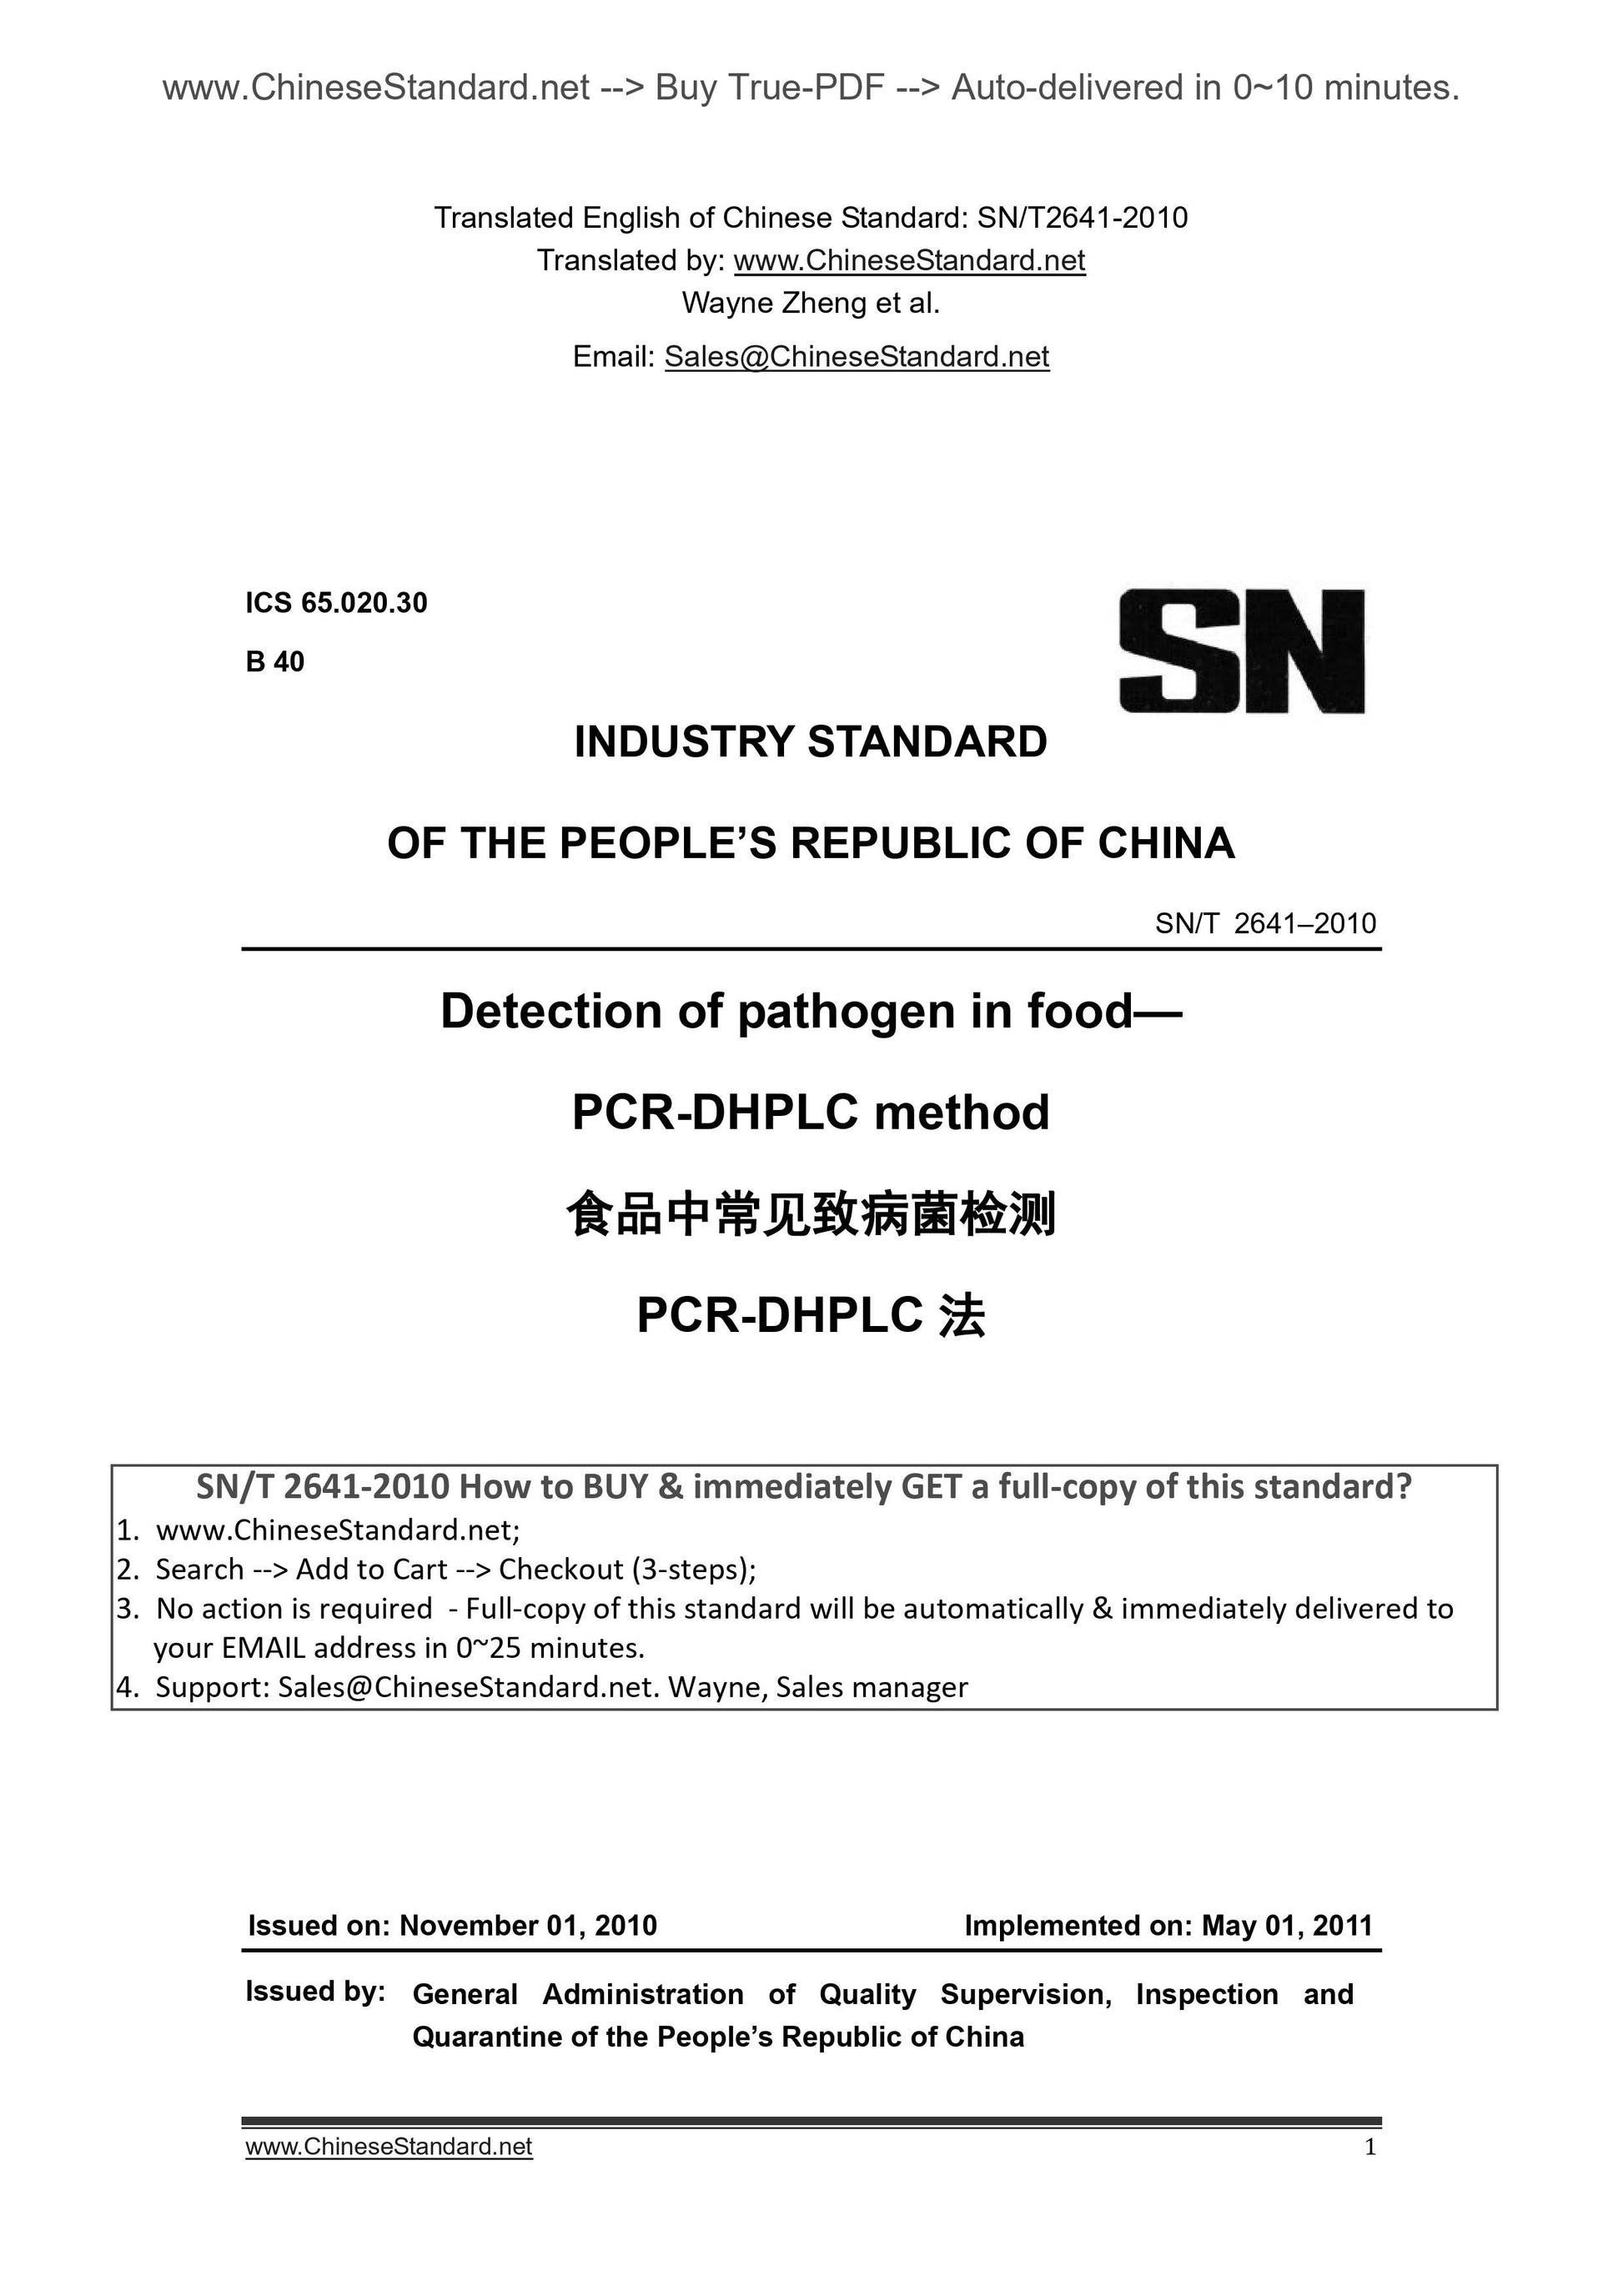 SN/T 2641-2010 Page 1